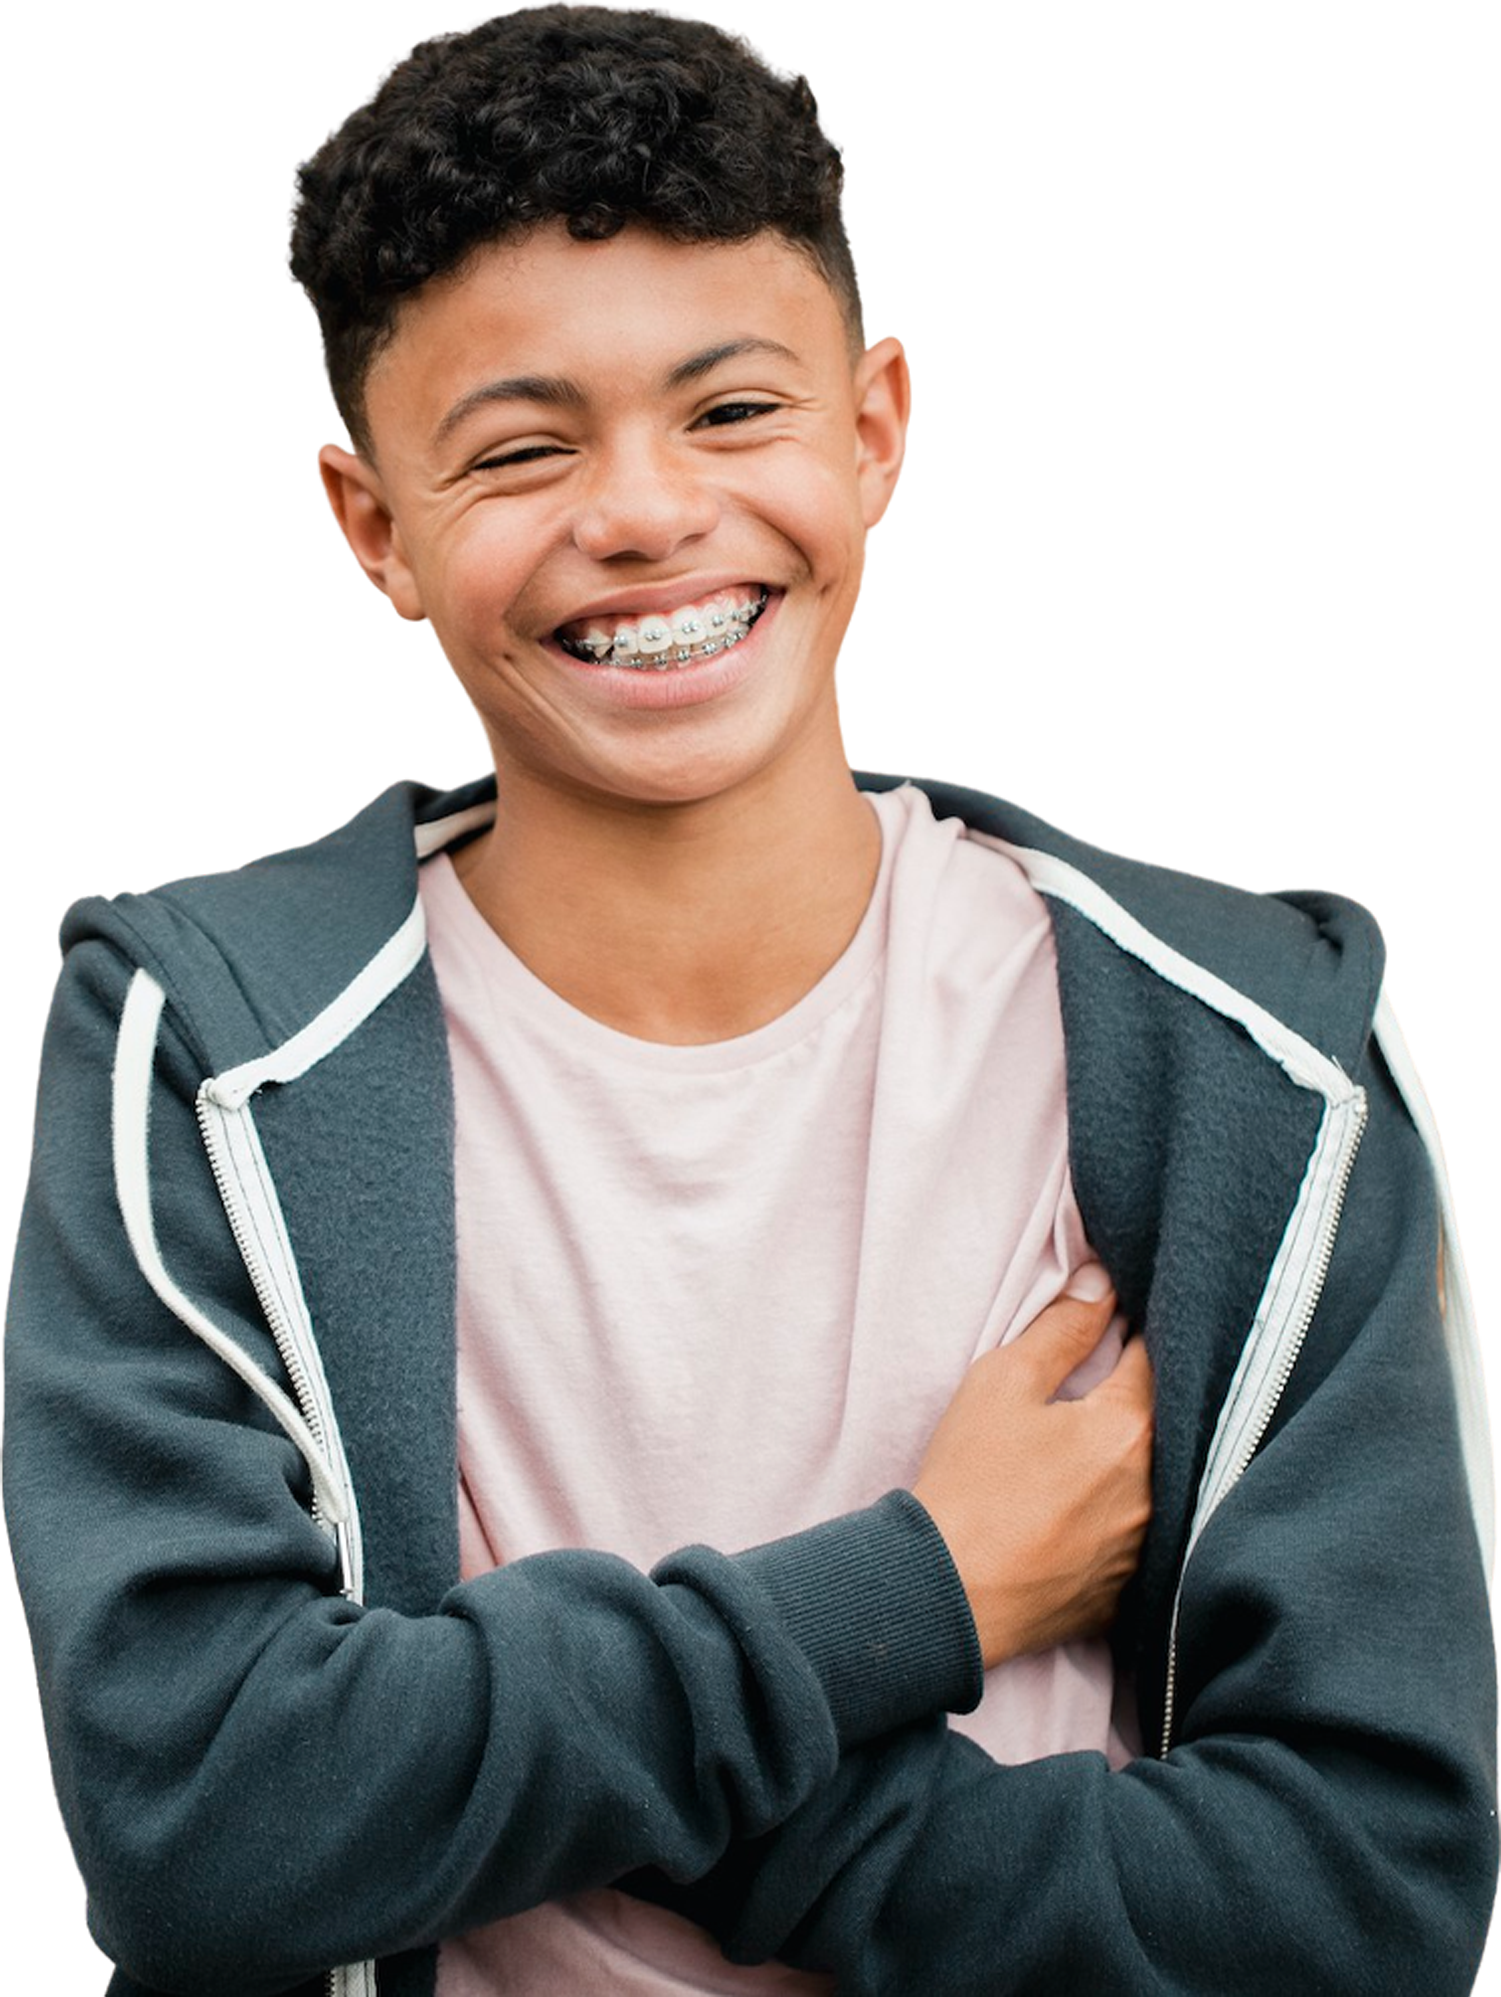 Cutout of a young boy with braces, and he is crossing his arms